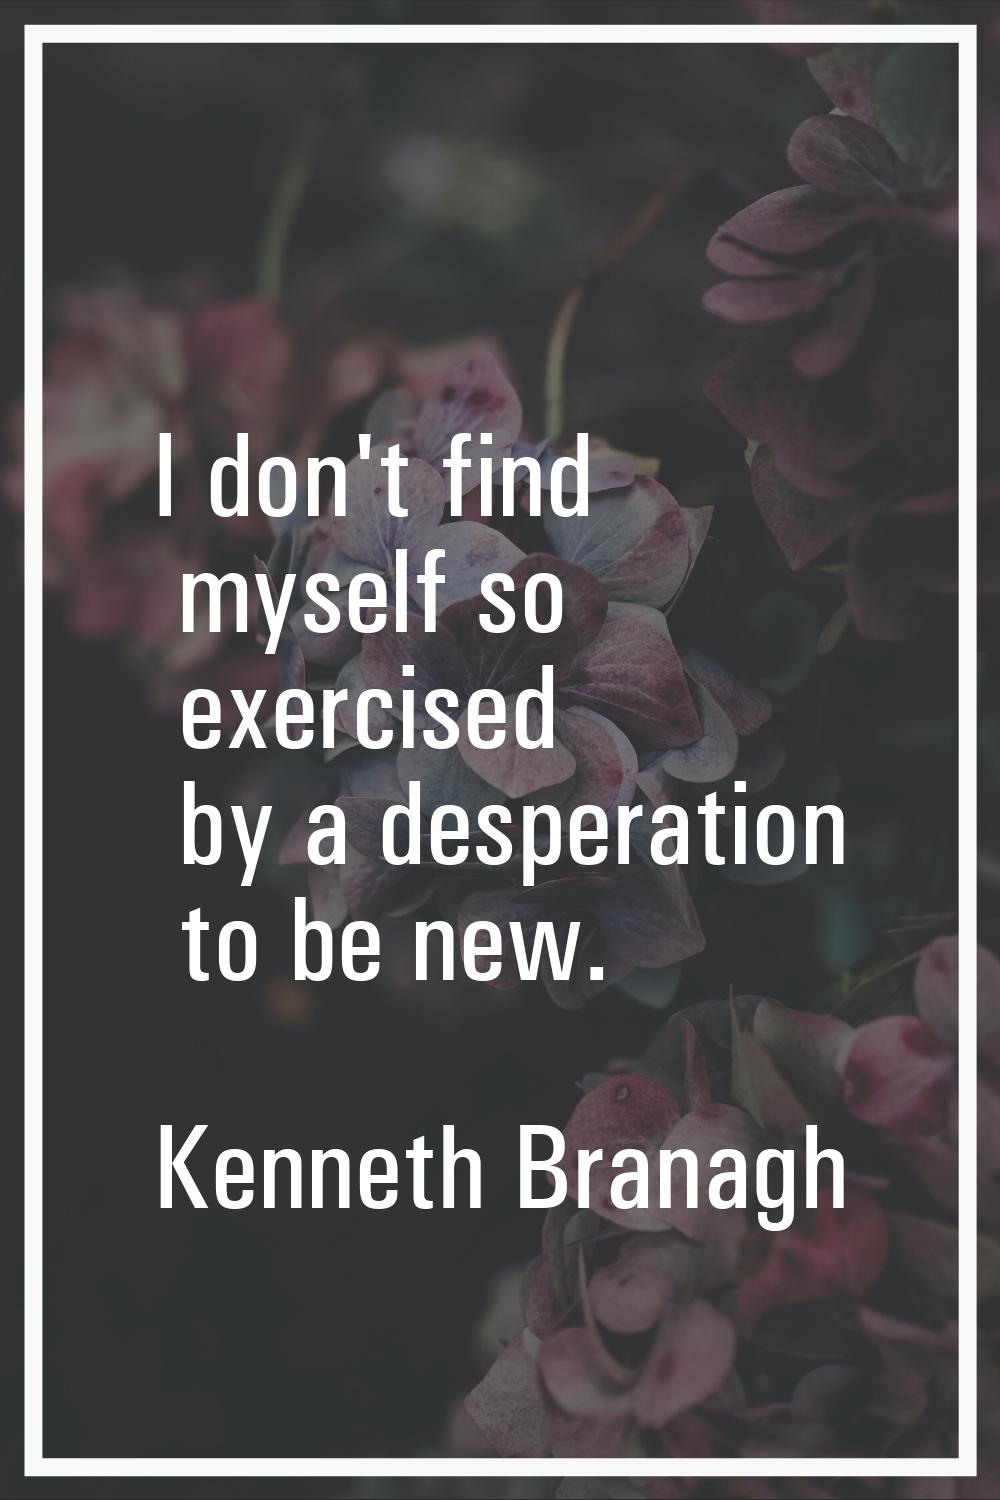 I don't find myself so exercised by a desperation to be new.